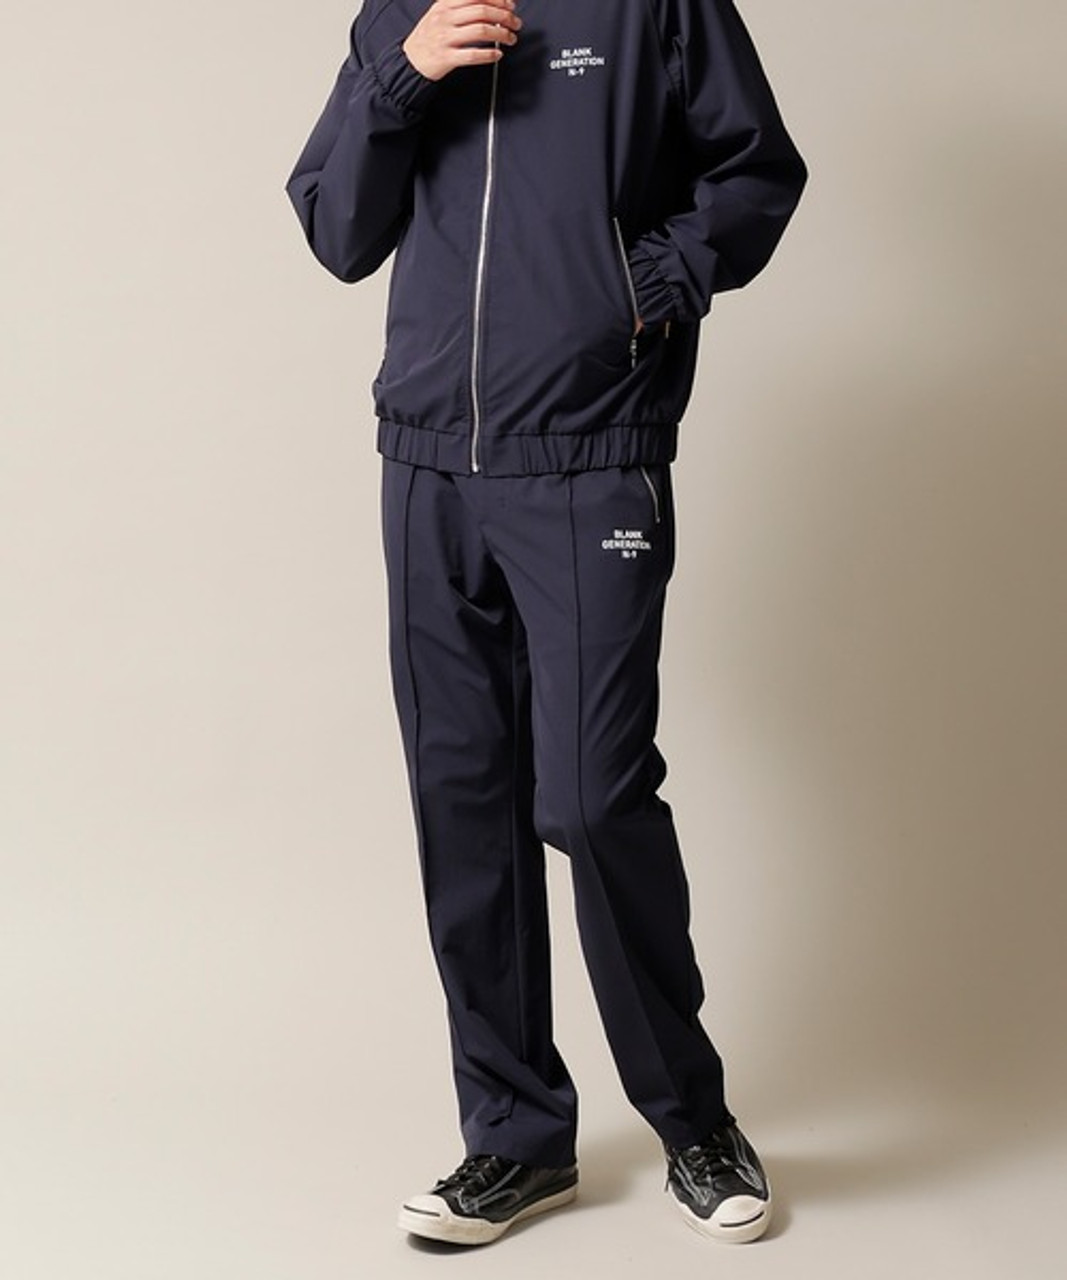 ADONI MMVII NEW YORK Brand New Hooded Track Suit